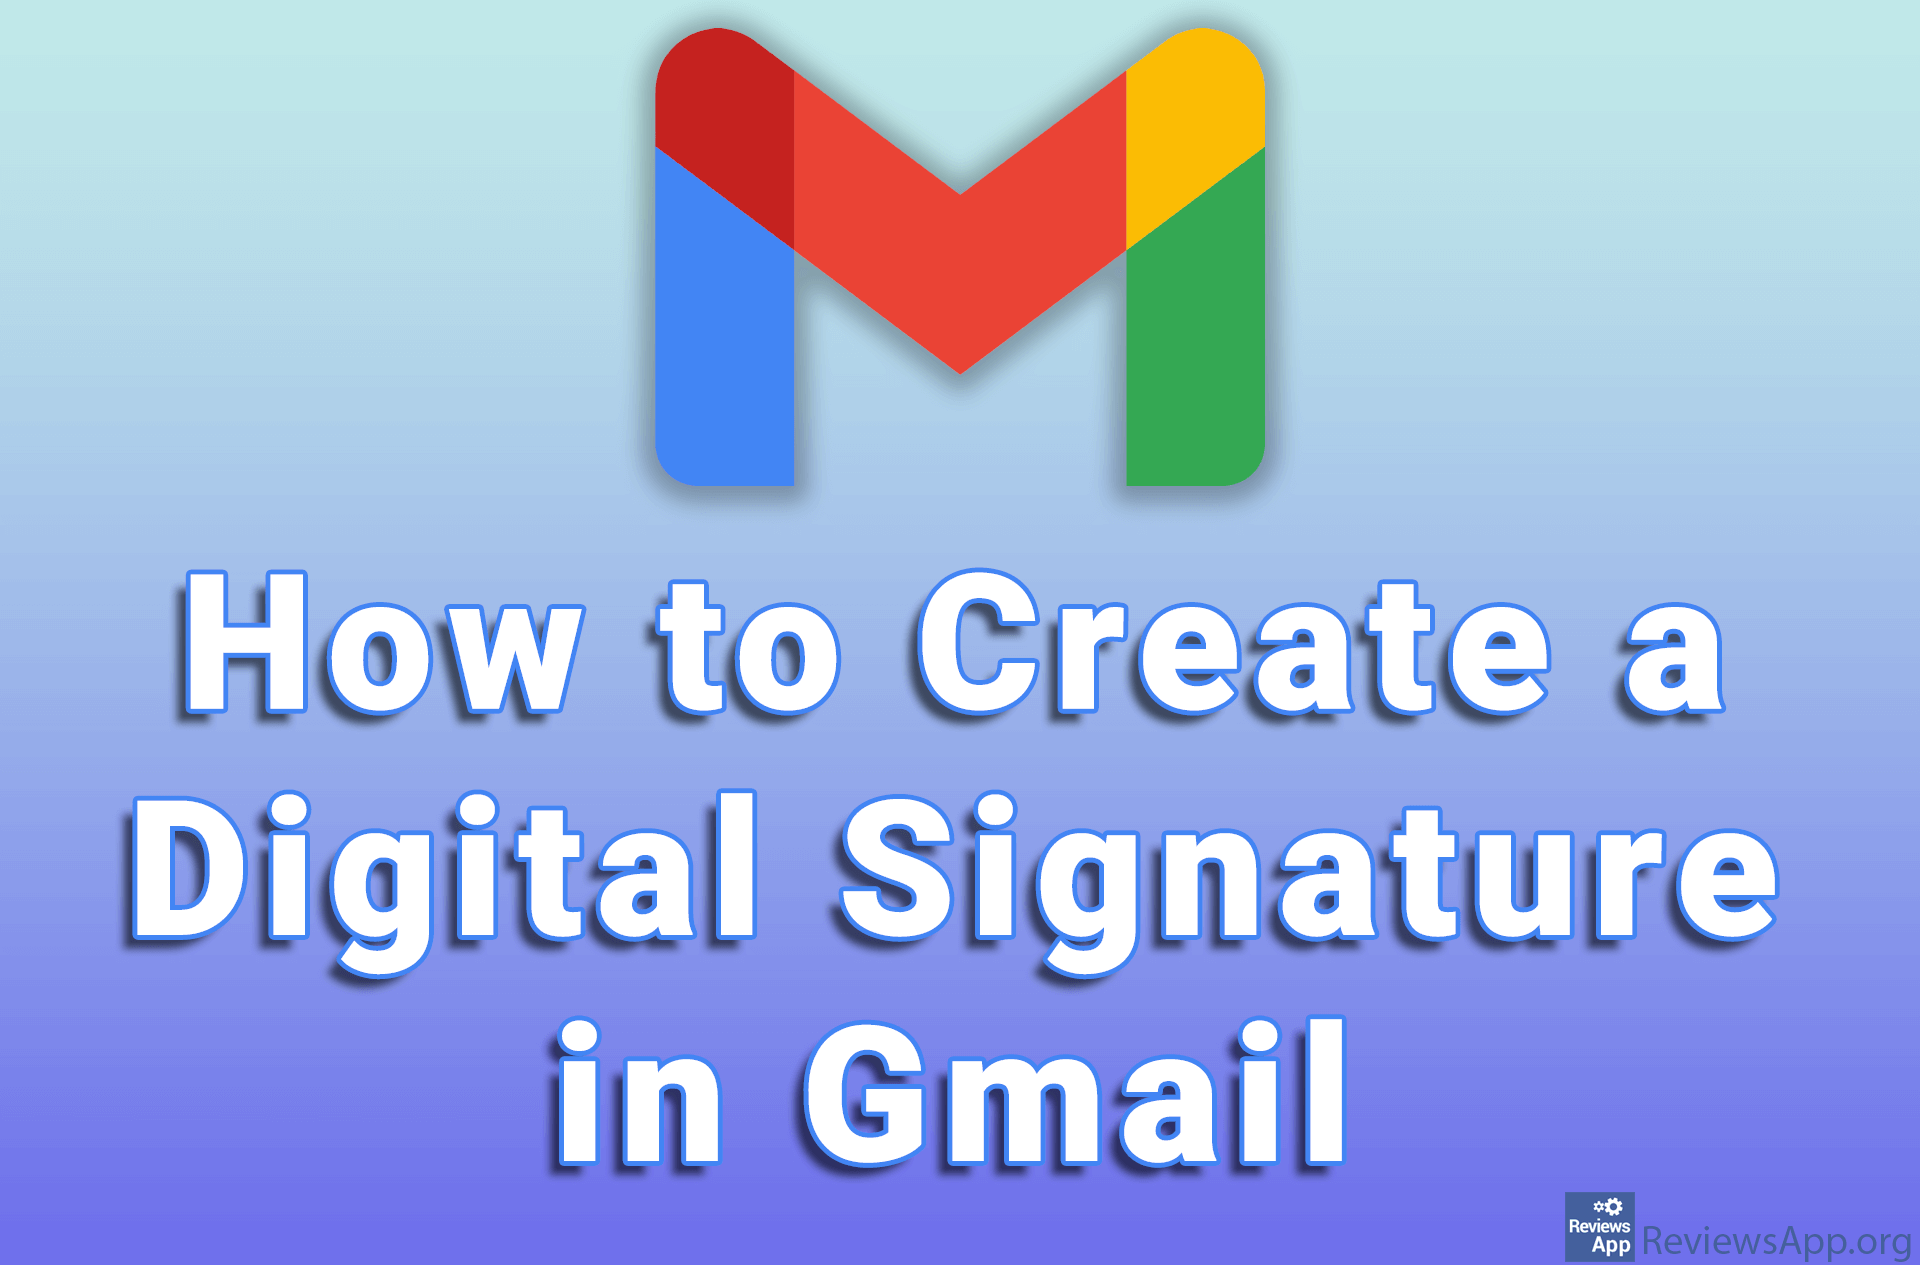 How to Create a Digital Signature in Gmail